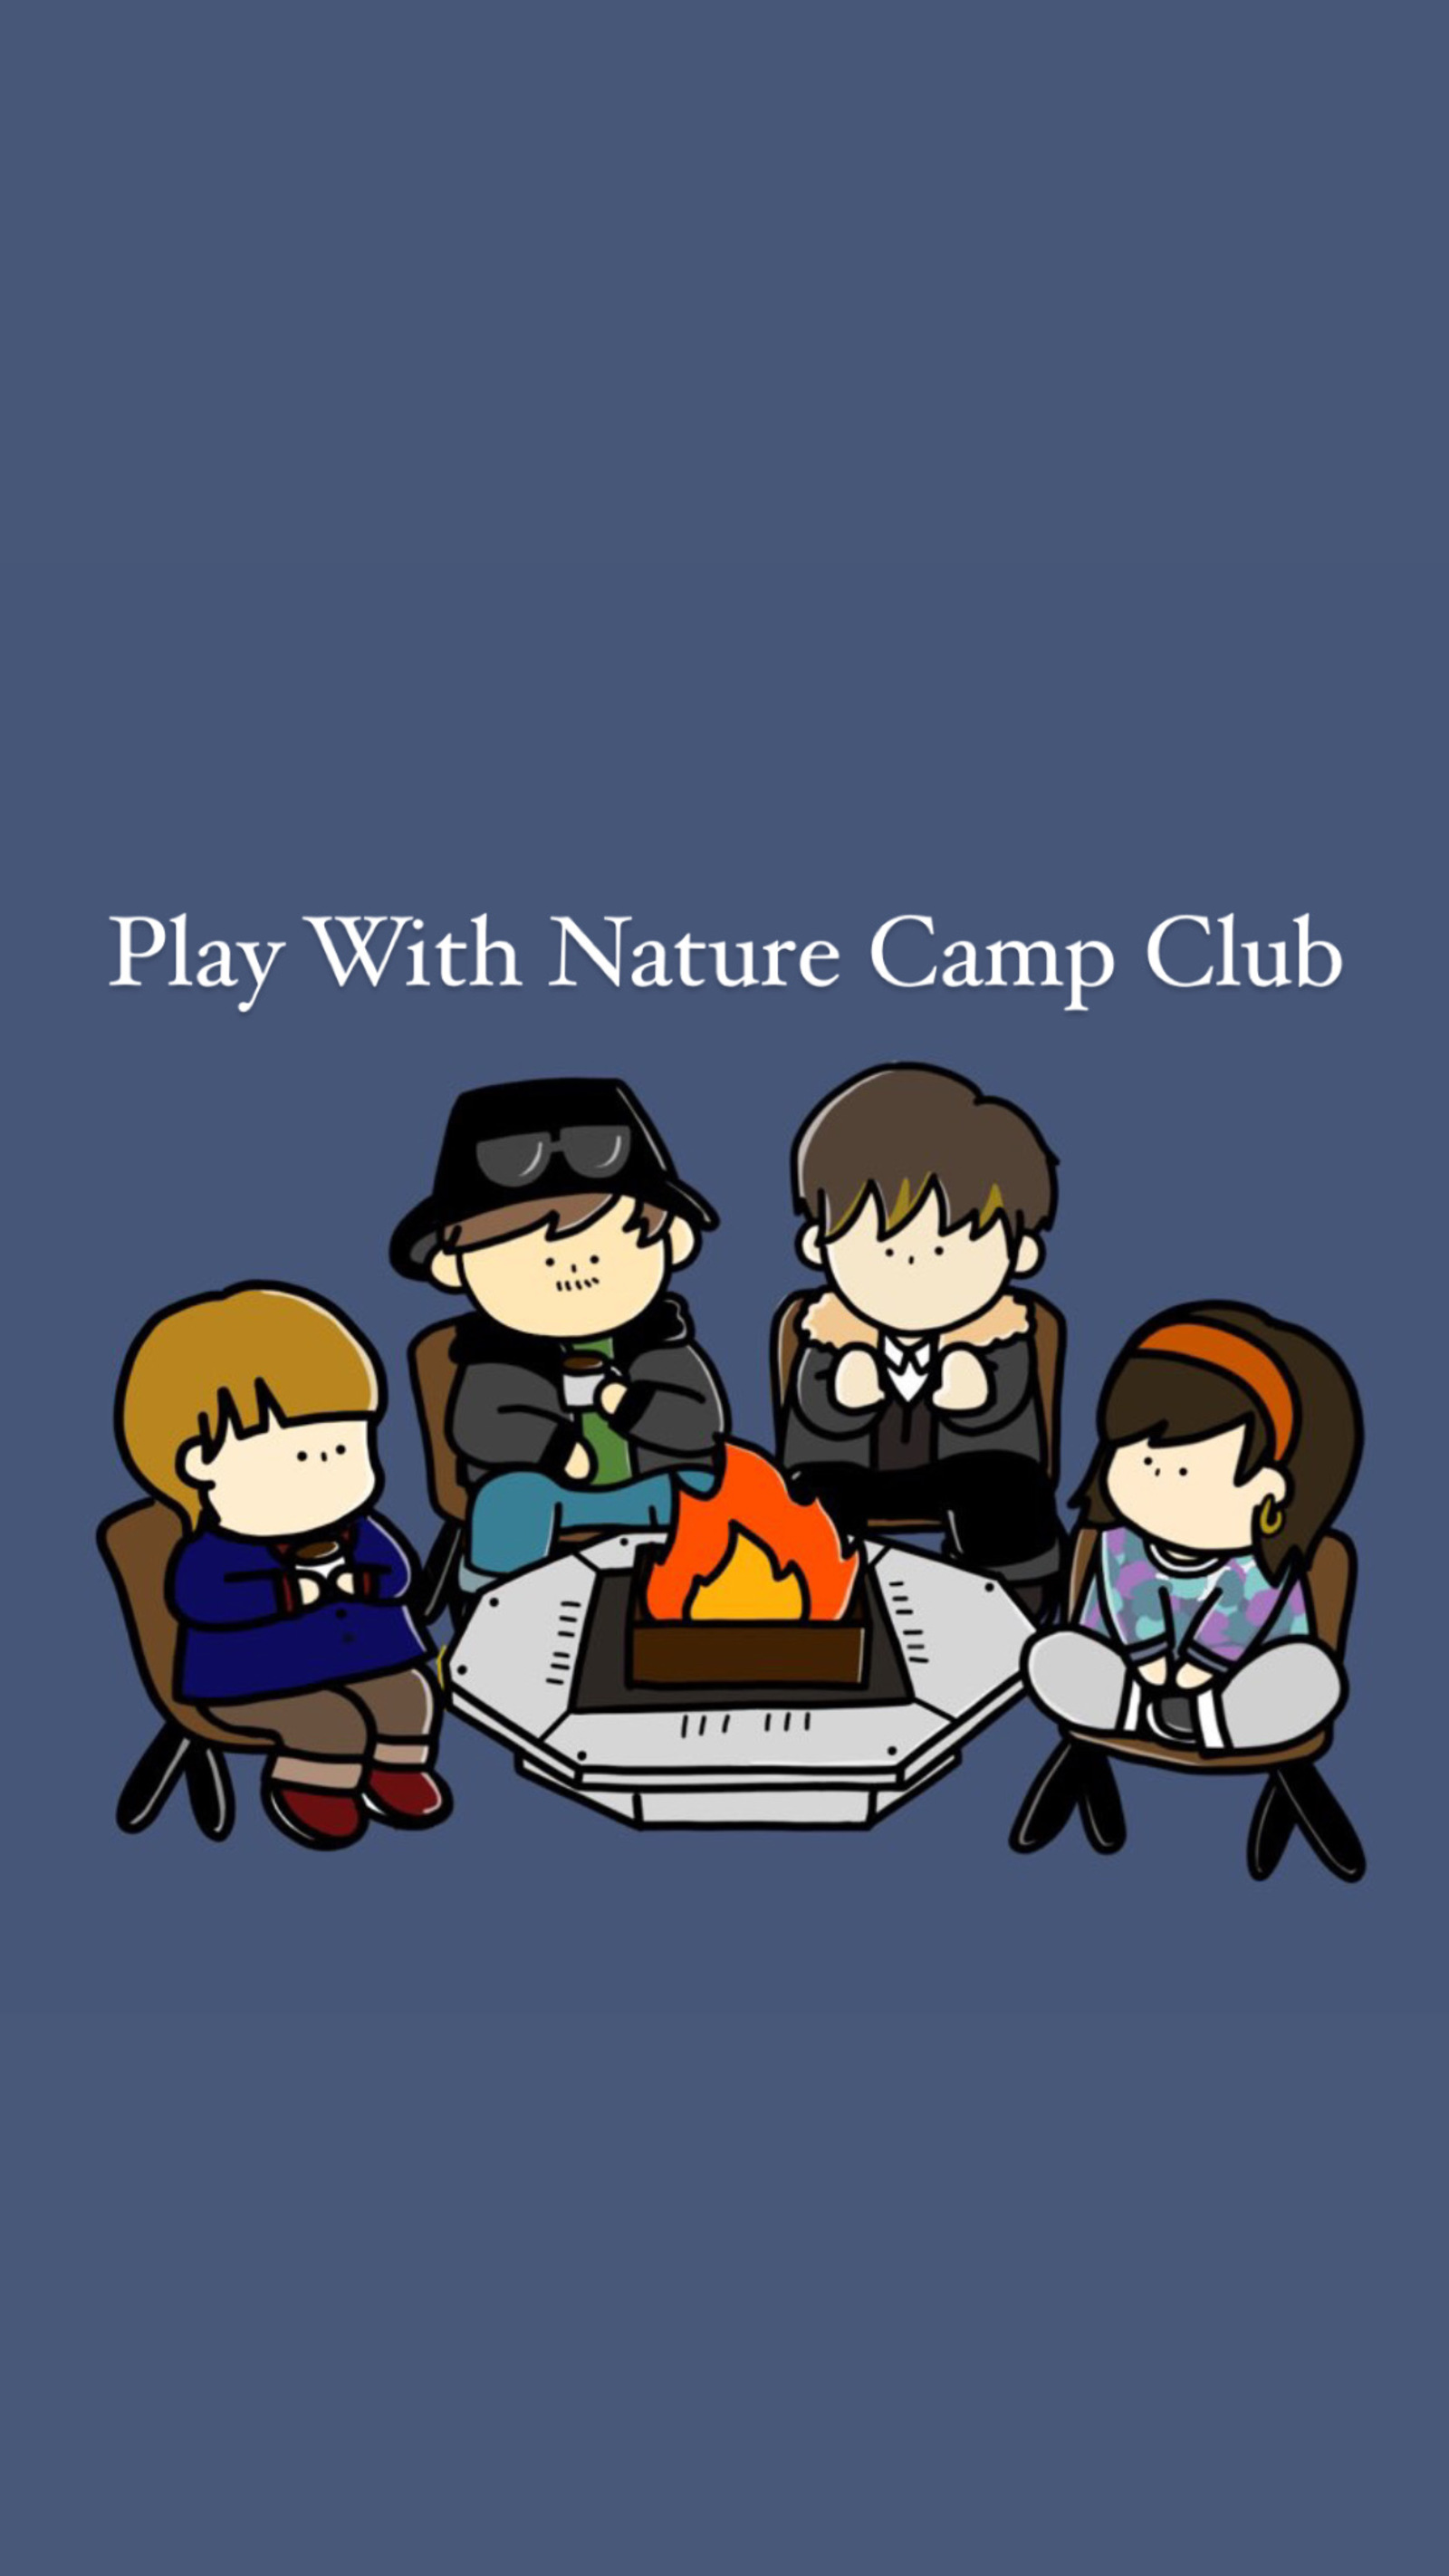 Play With Nature - Camp Club